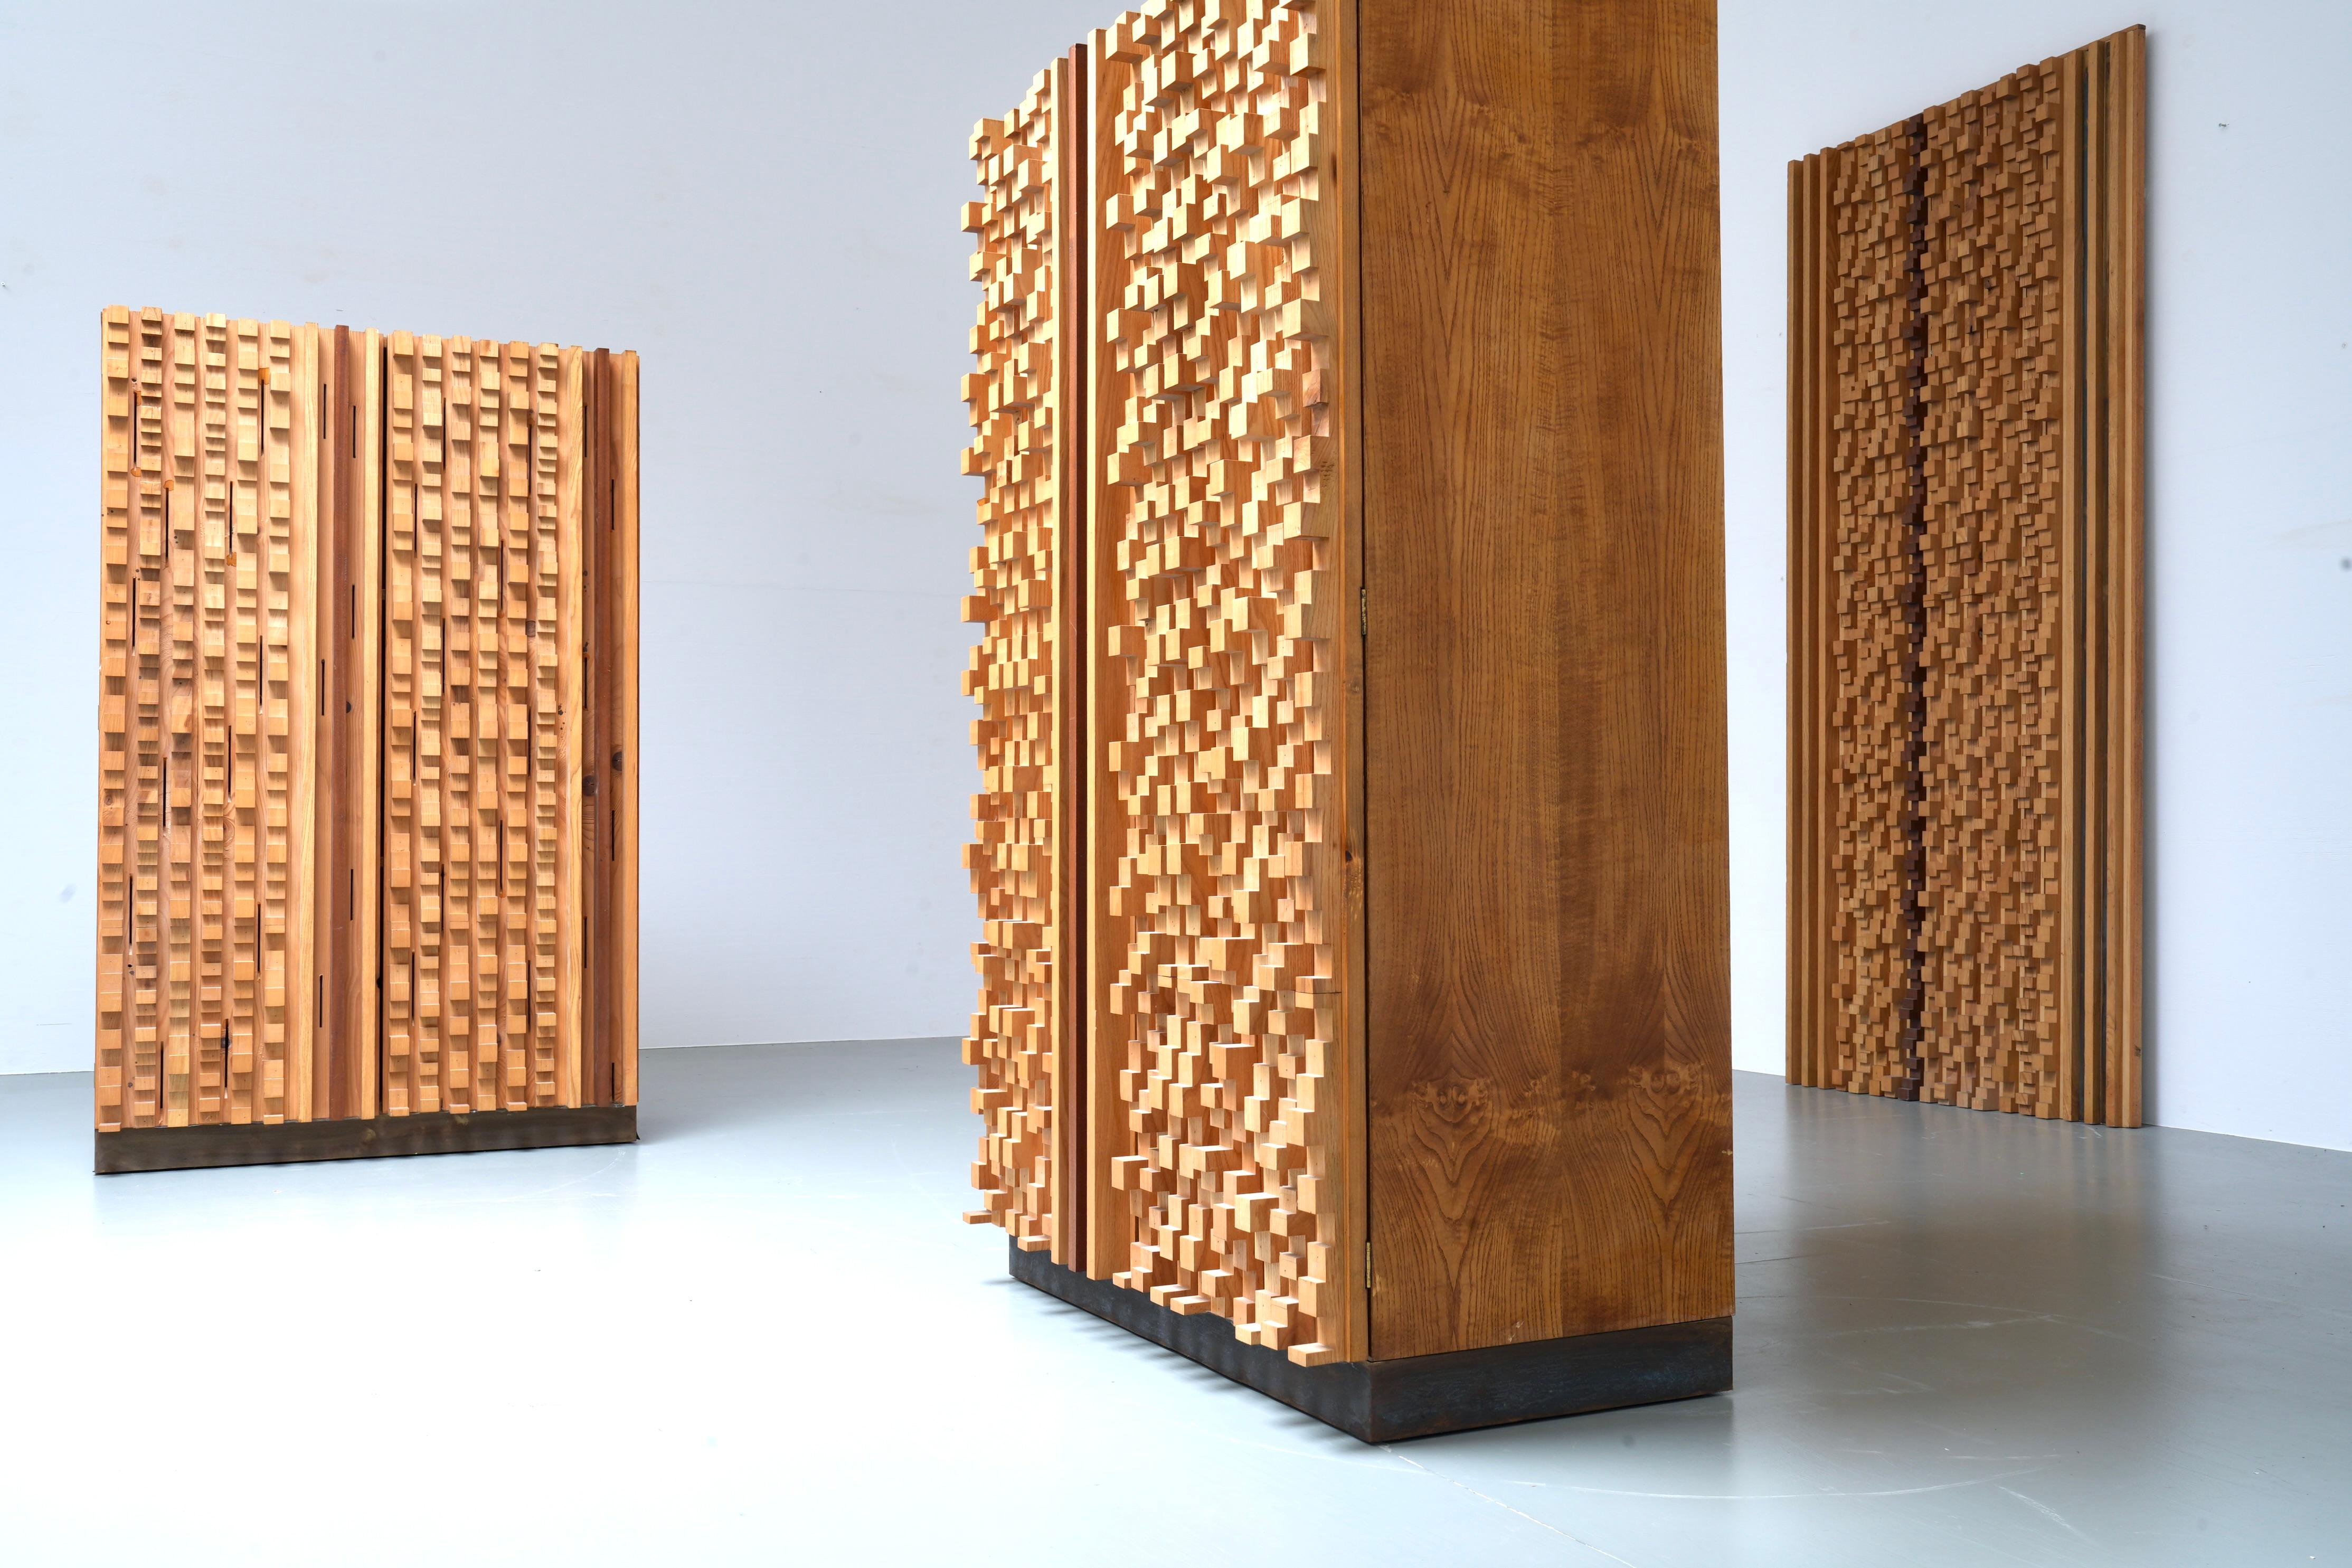 Set of 2 Cabinets and 3 Wall Panels by Stefano d'Amico, Italy, 1974 For Sale 1